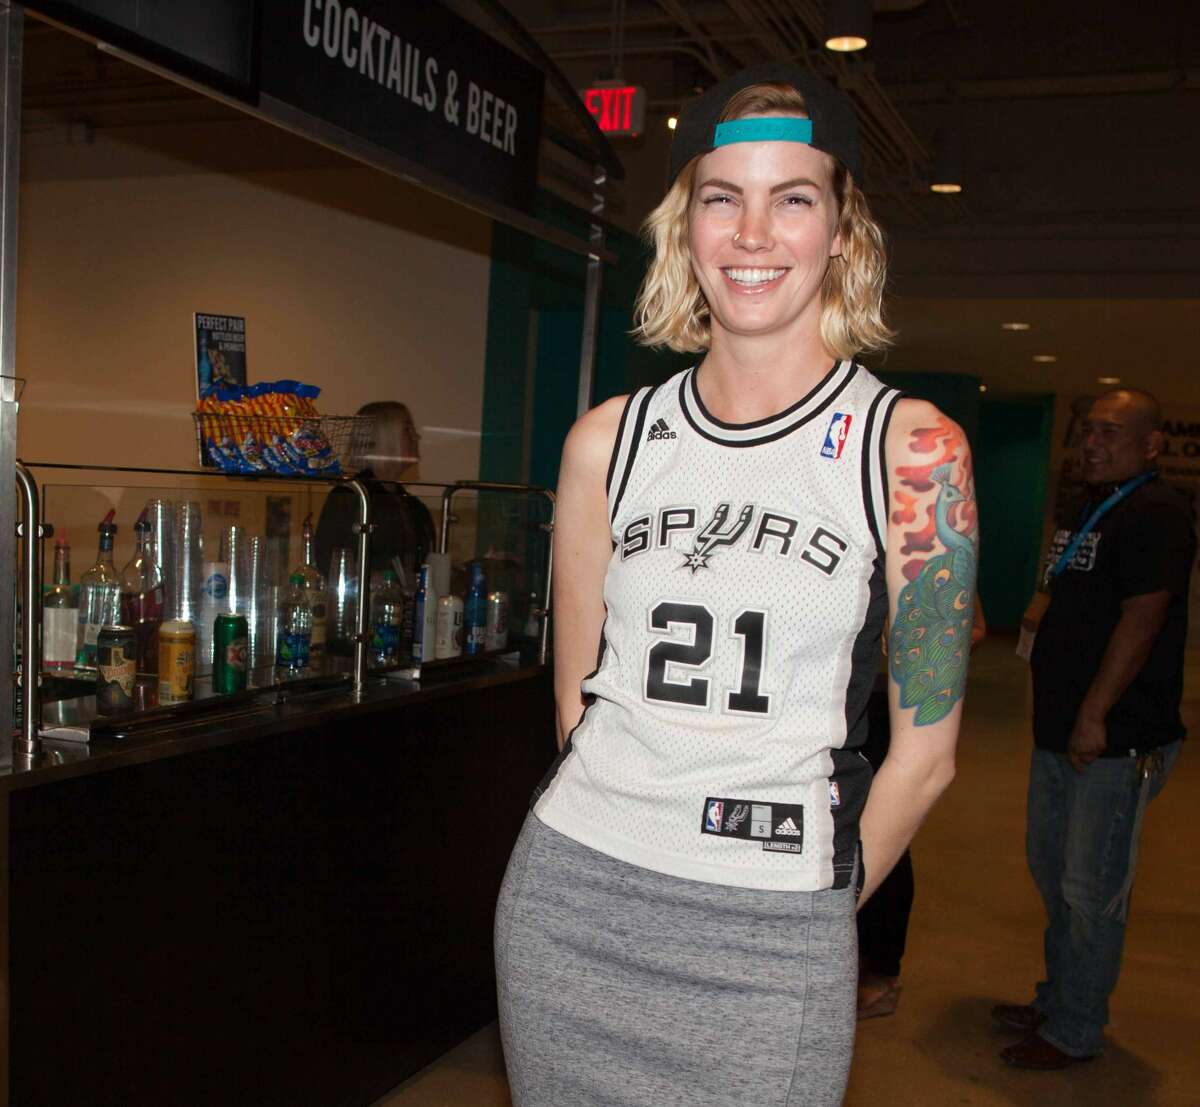 Spurs fans enjoyed an epic Game 1 win against the Oklahoma City Thunder Saturday night, April 30, 2016, at the AT&T Center. Here is a look at how everyone celebrated the boys in Black and Silver.